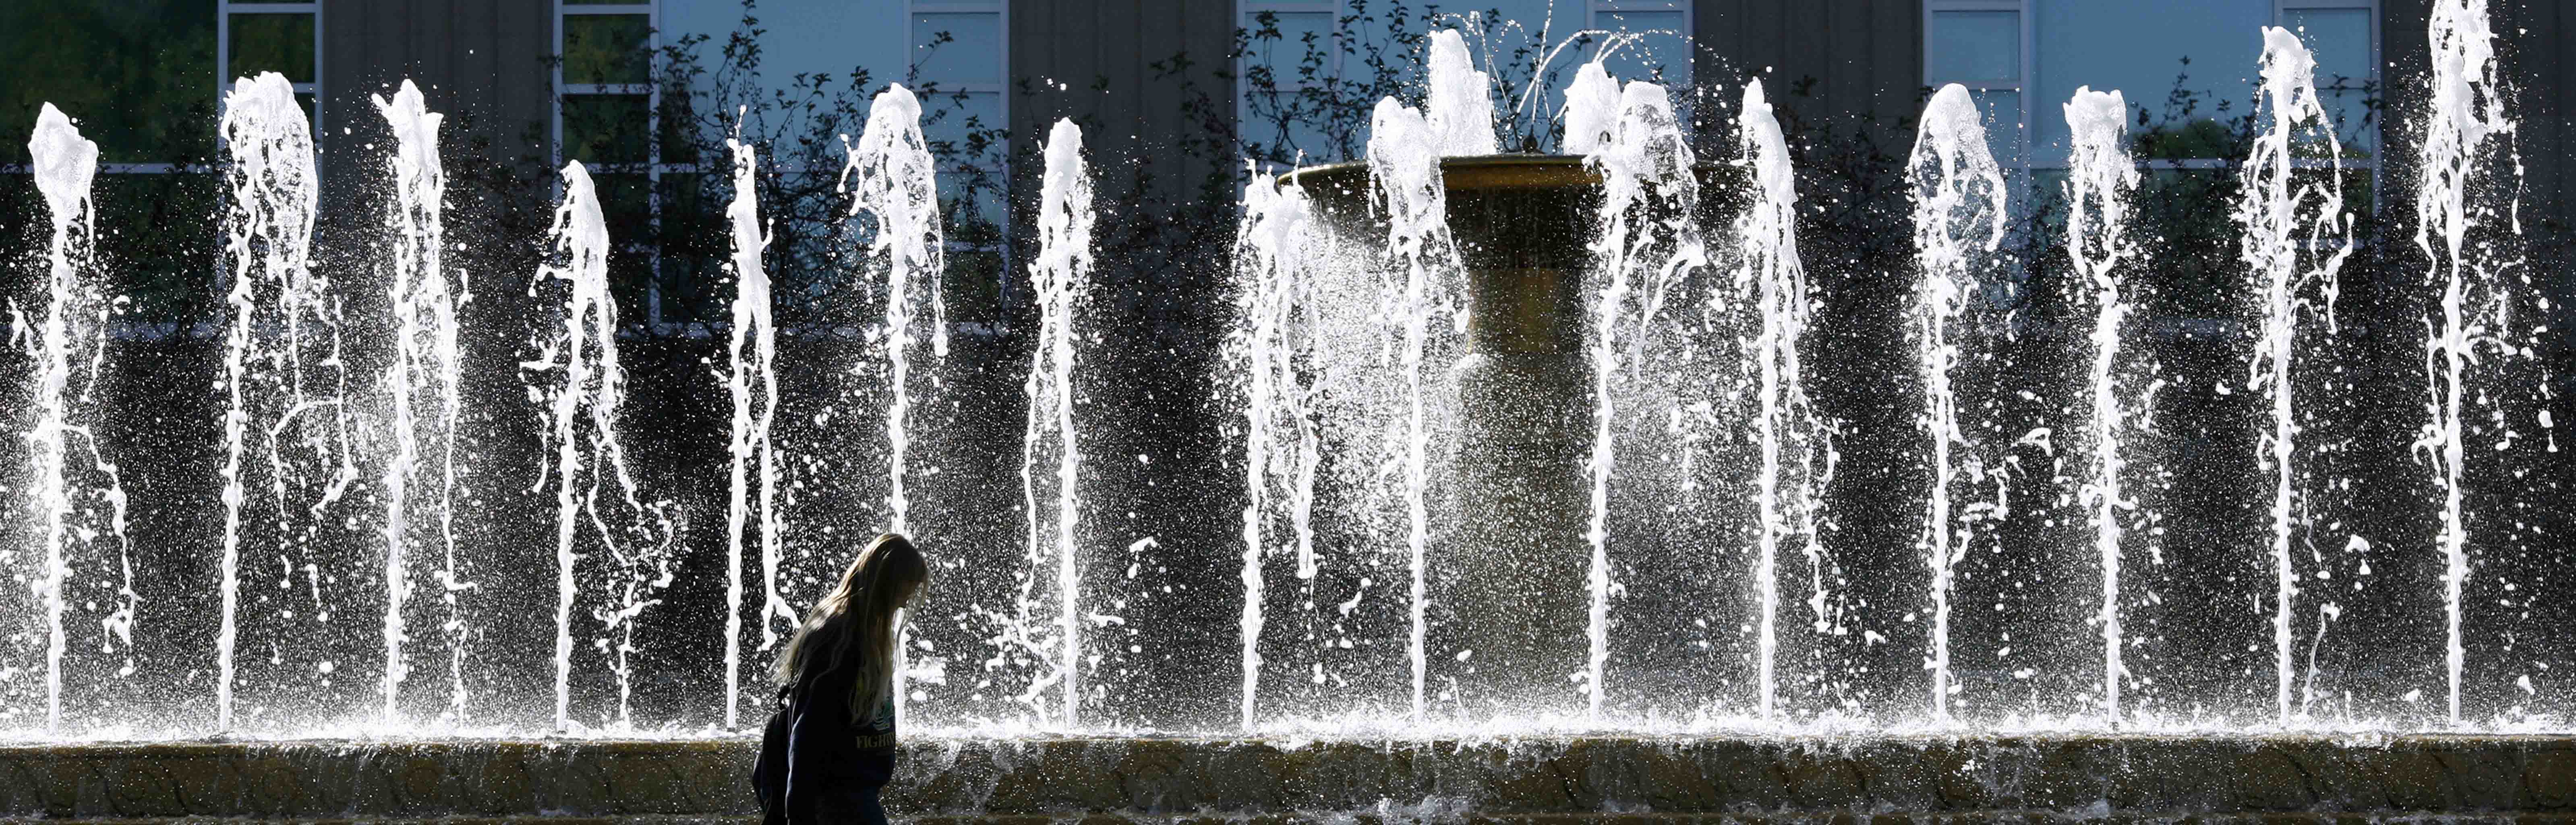 A photograph of a large outdoor fountain in front of a building